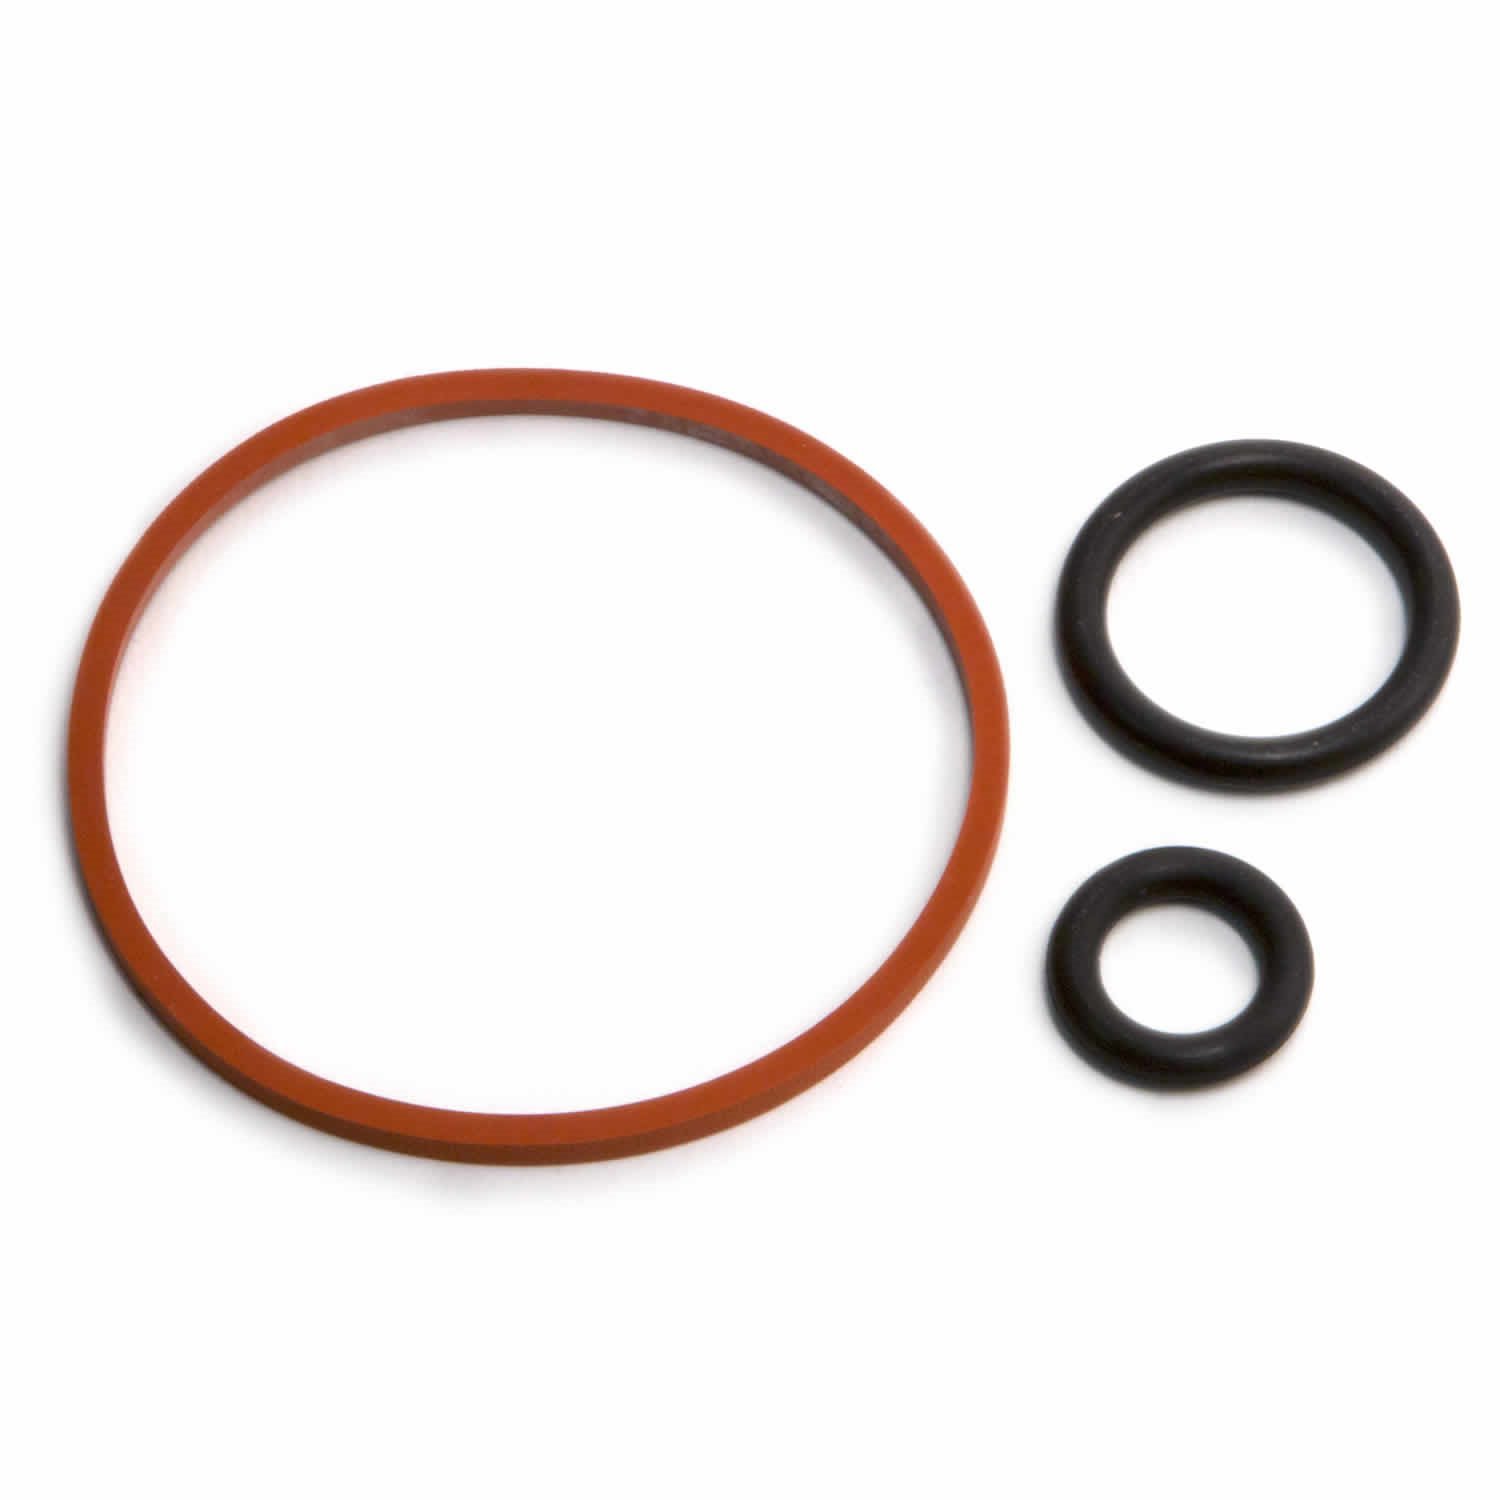 Turbine Housing O-Ring Replacement Kit 1994-97 Ford 7.3L Powerstroke